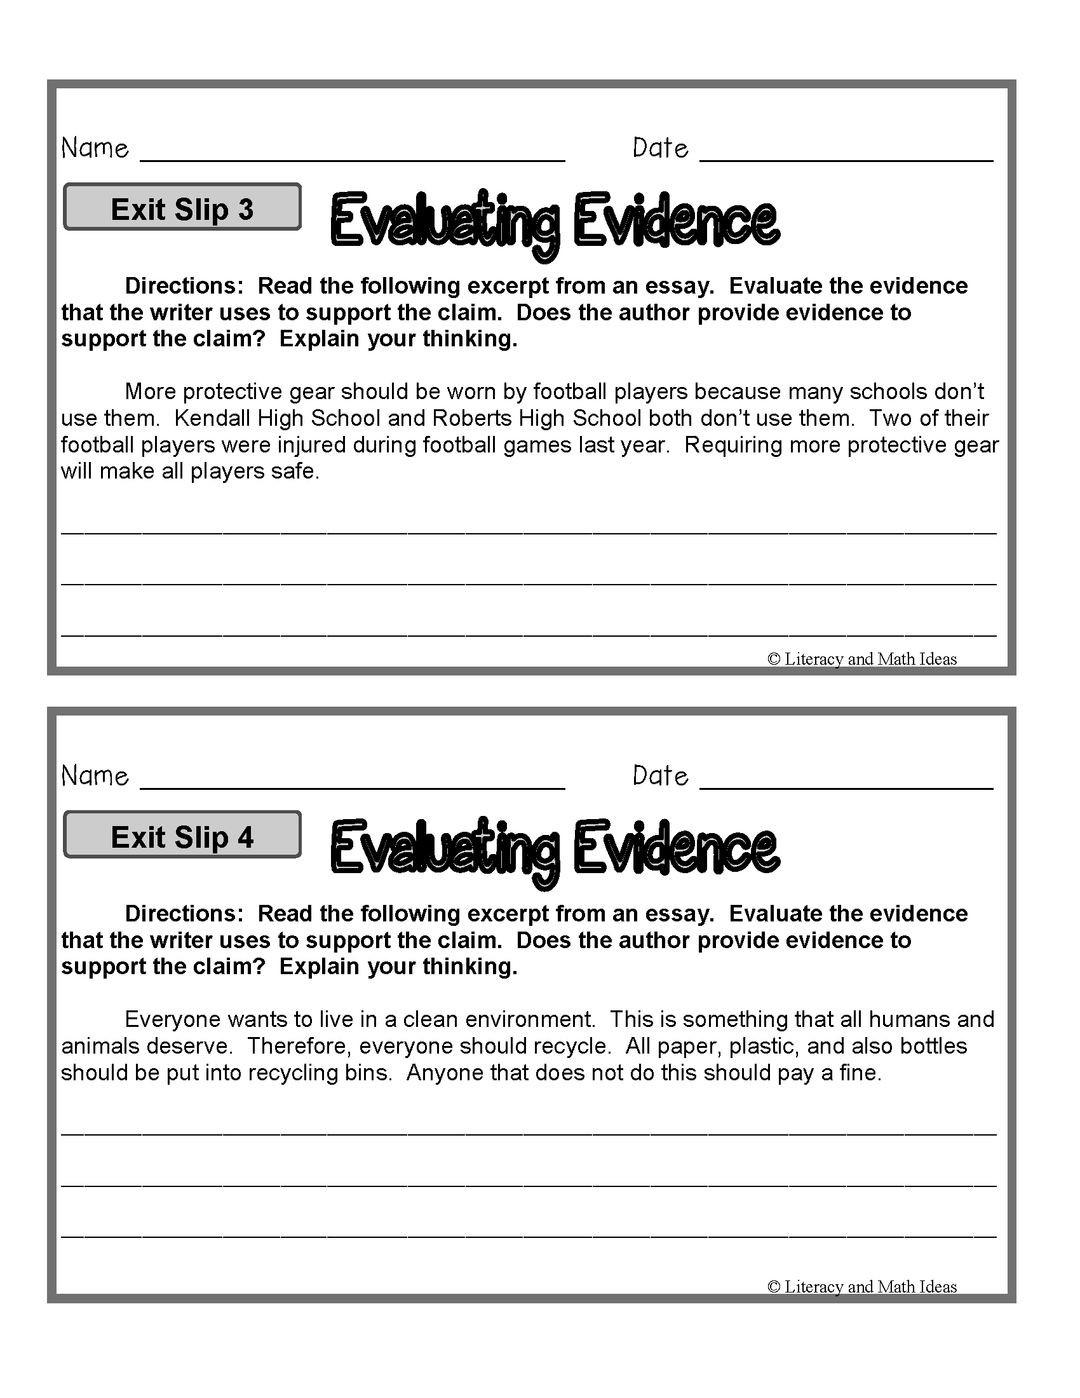 Argument Writing Exit Slips